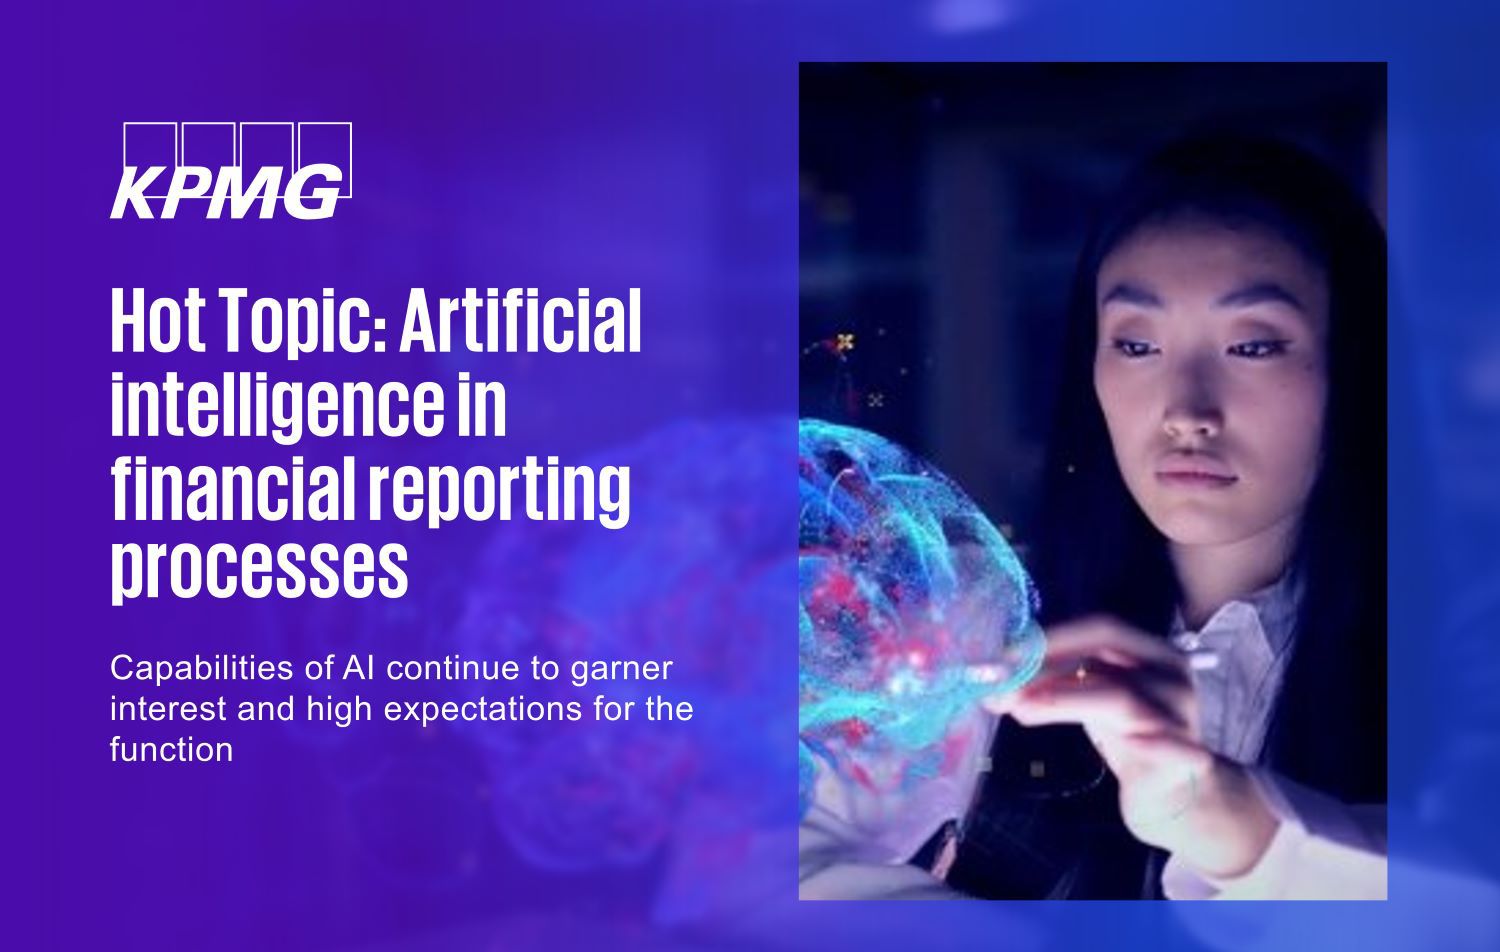 Hot topic: Artificial intelligence in financial reporting